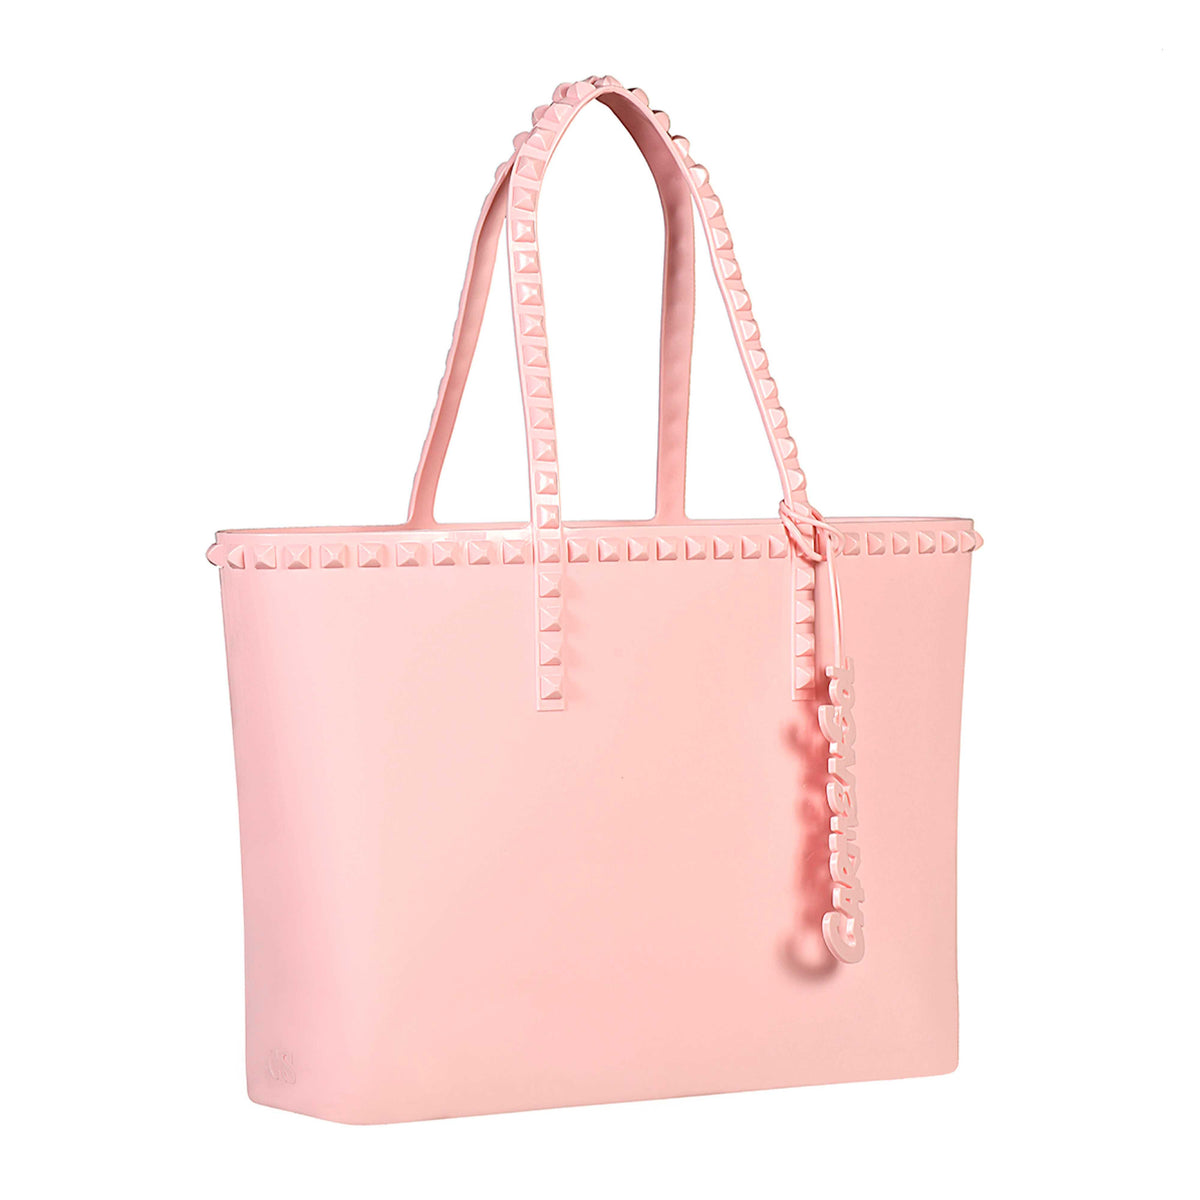 Seba large purse in color baby pink from Carmen Sol